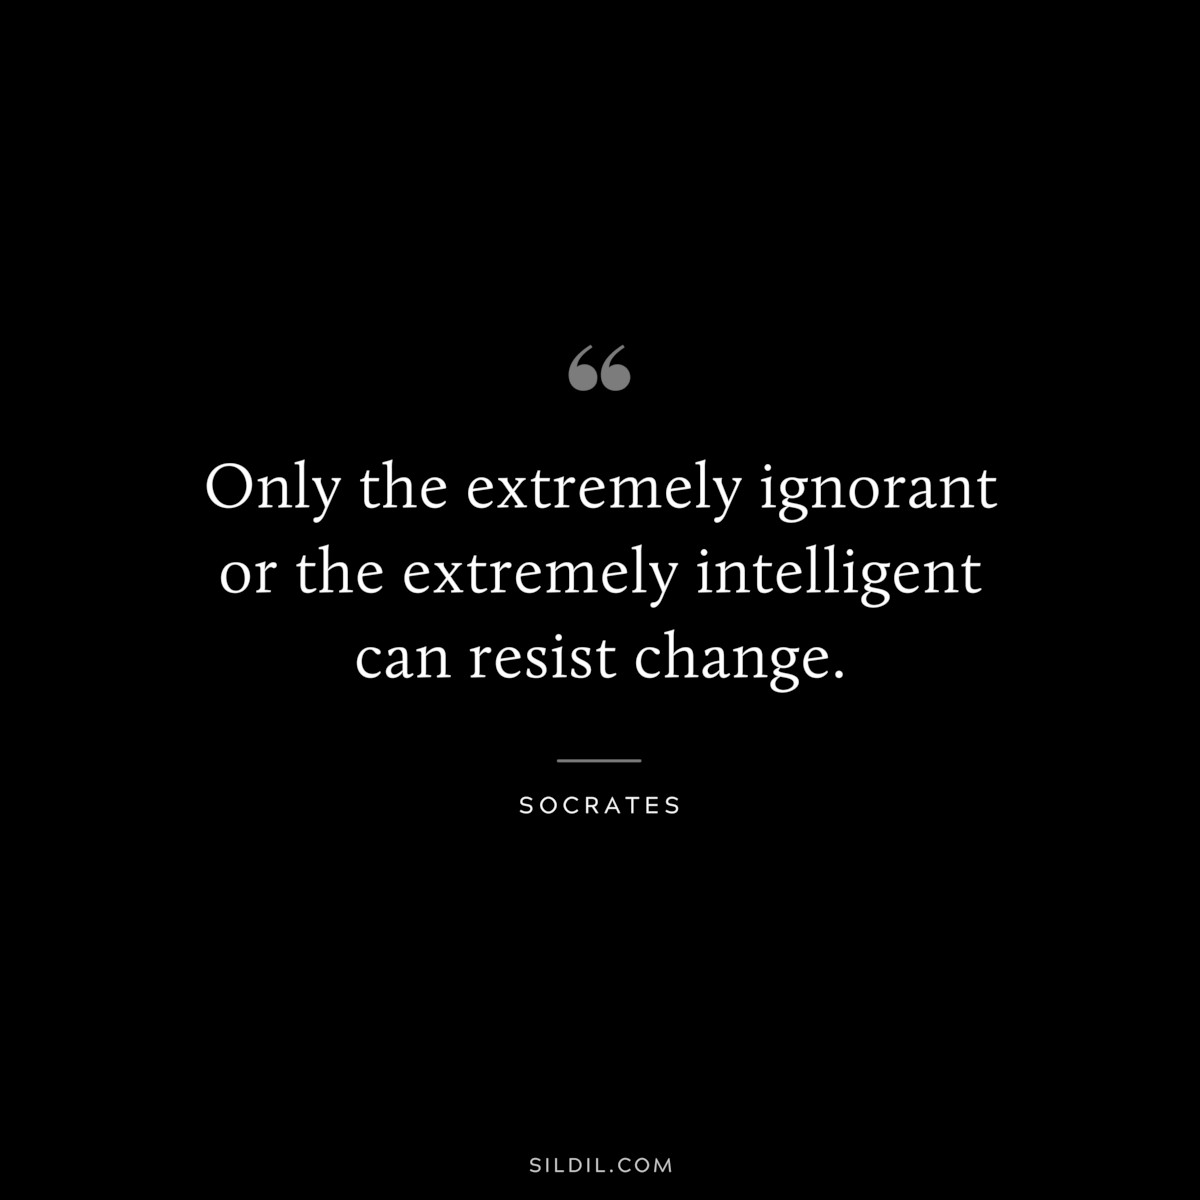 Only the extremely ignorant or the extremely intelligent can resist change. ― Socrates